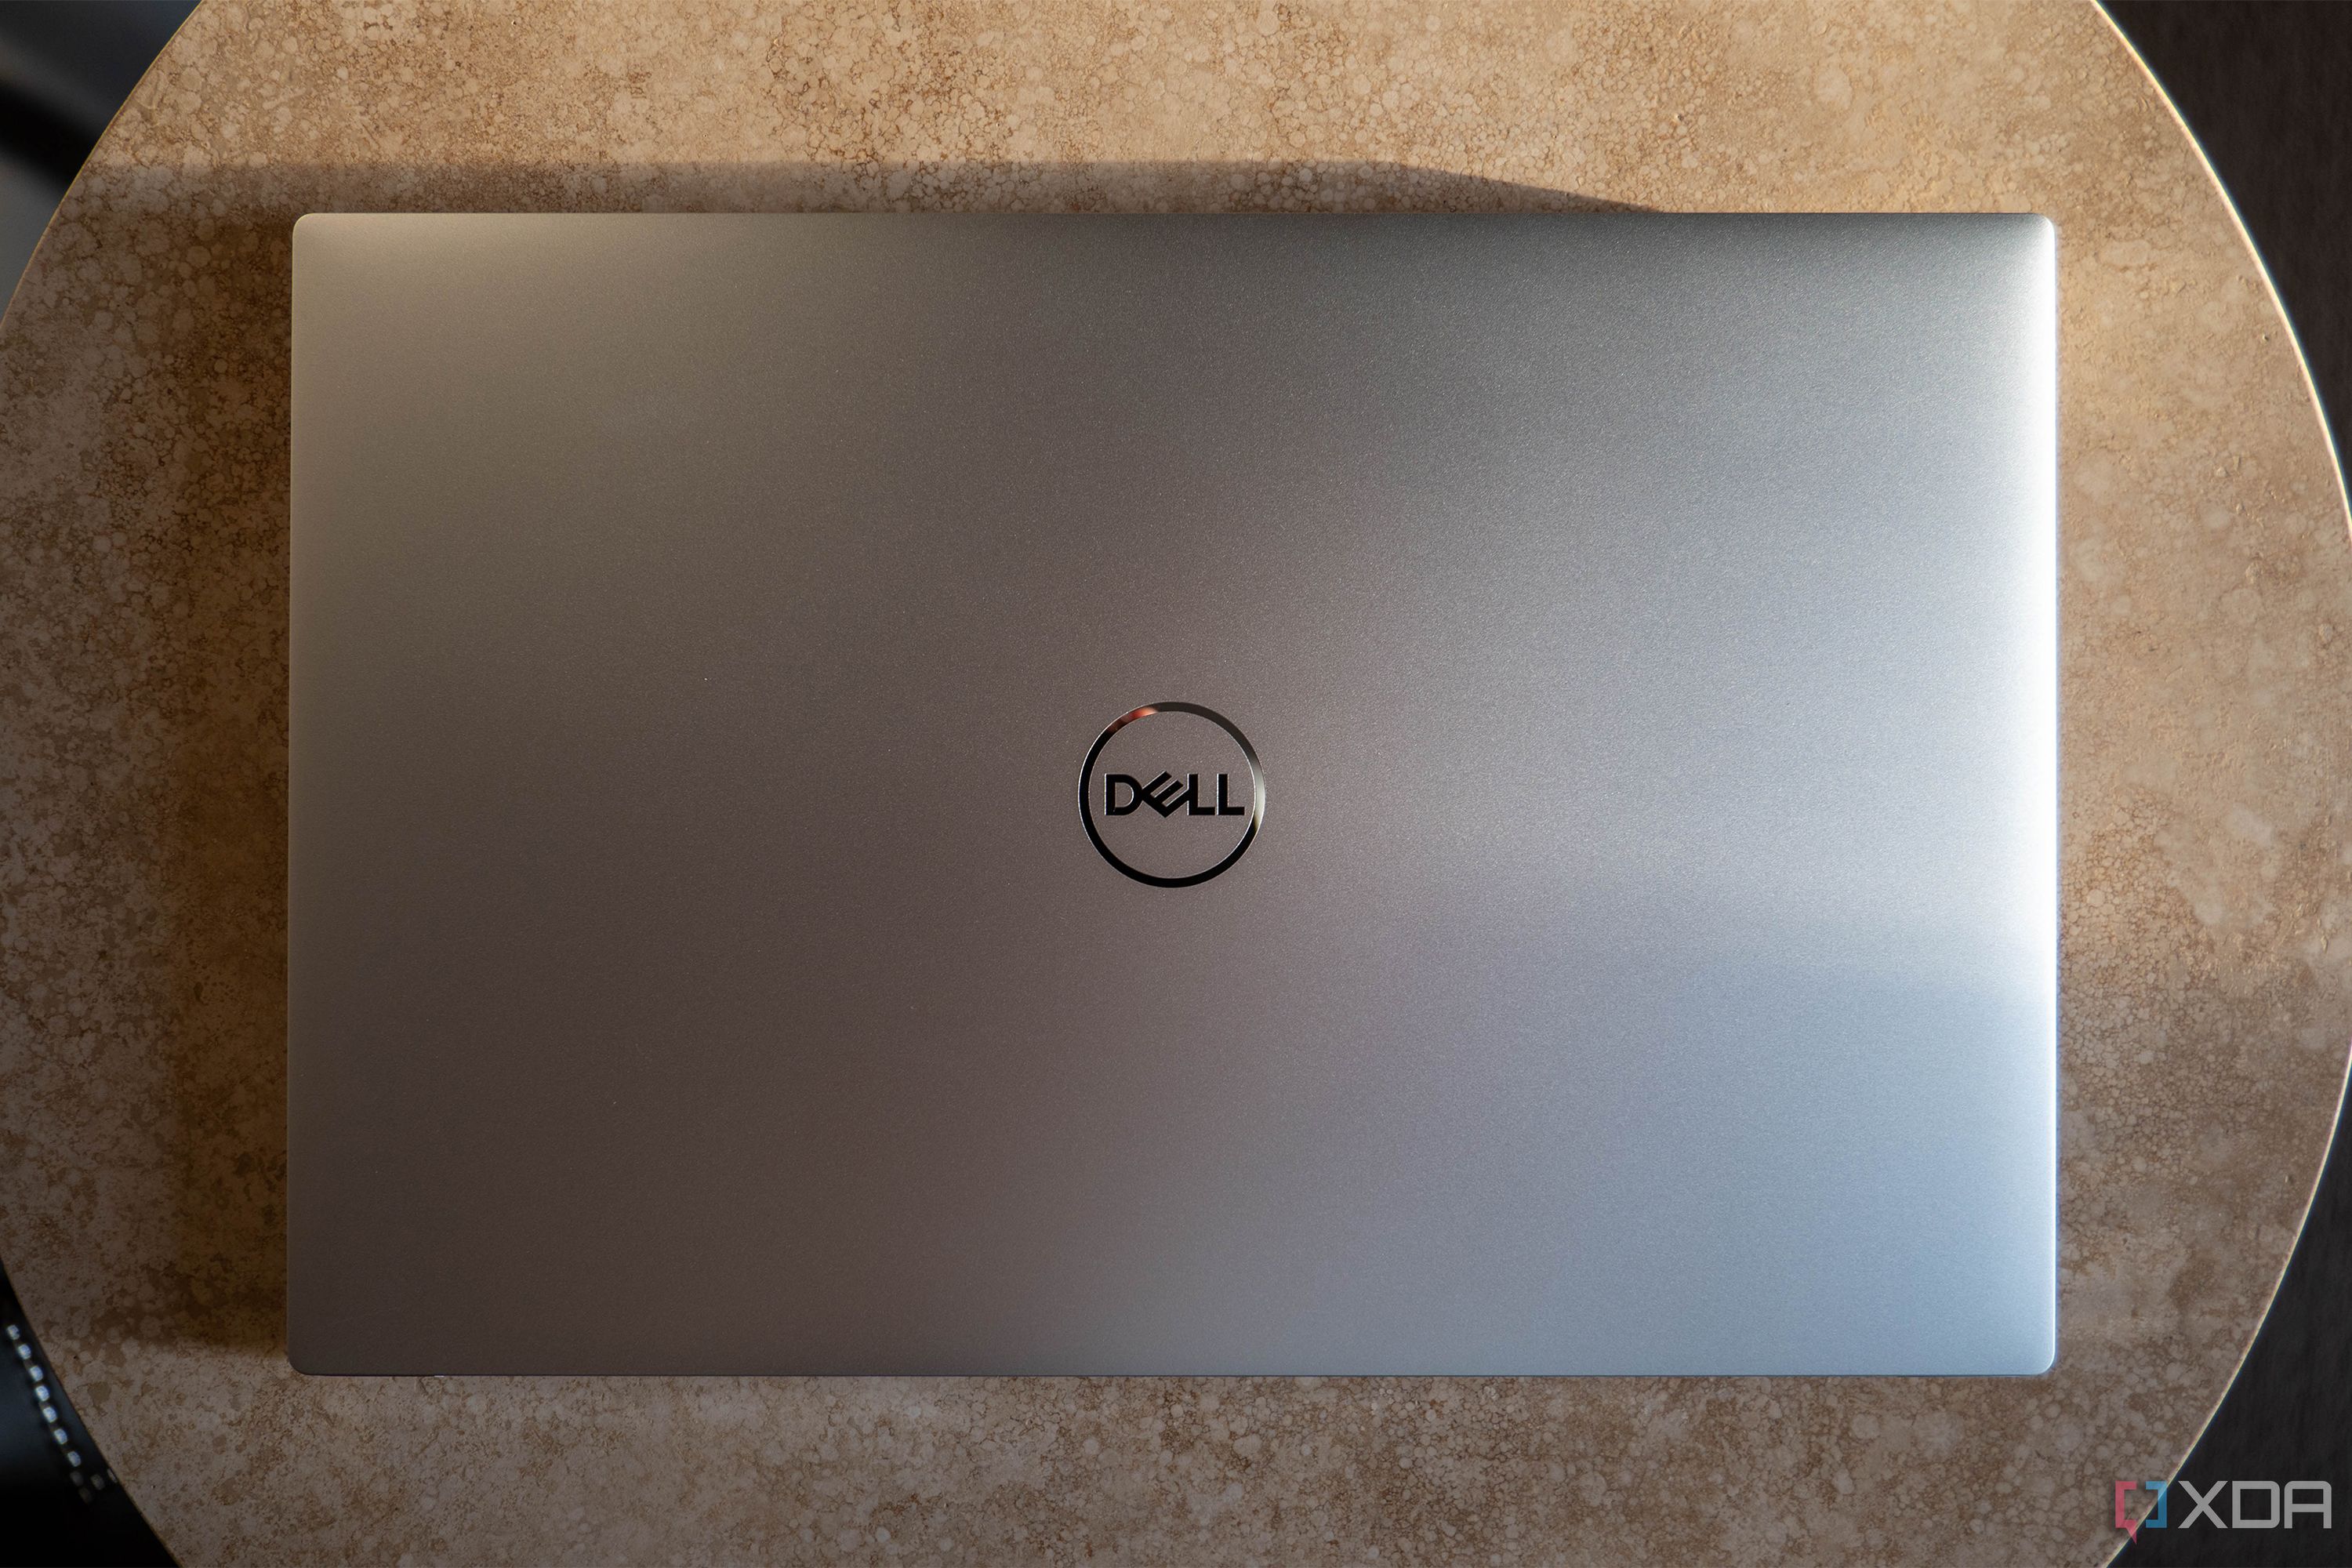 Top down view of silver Dell laptop